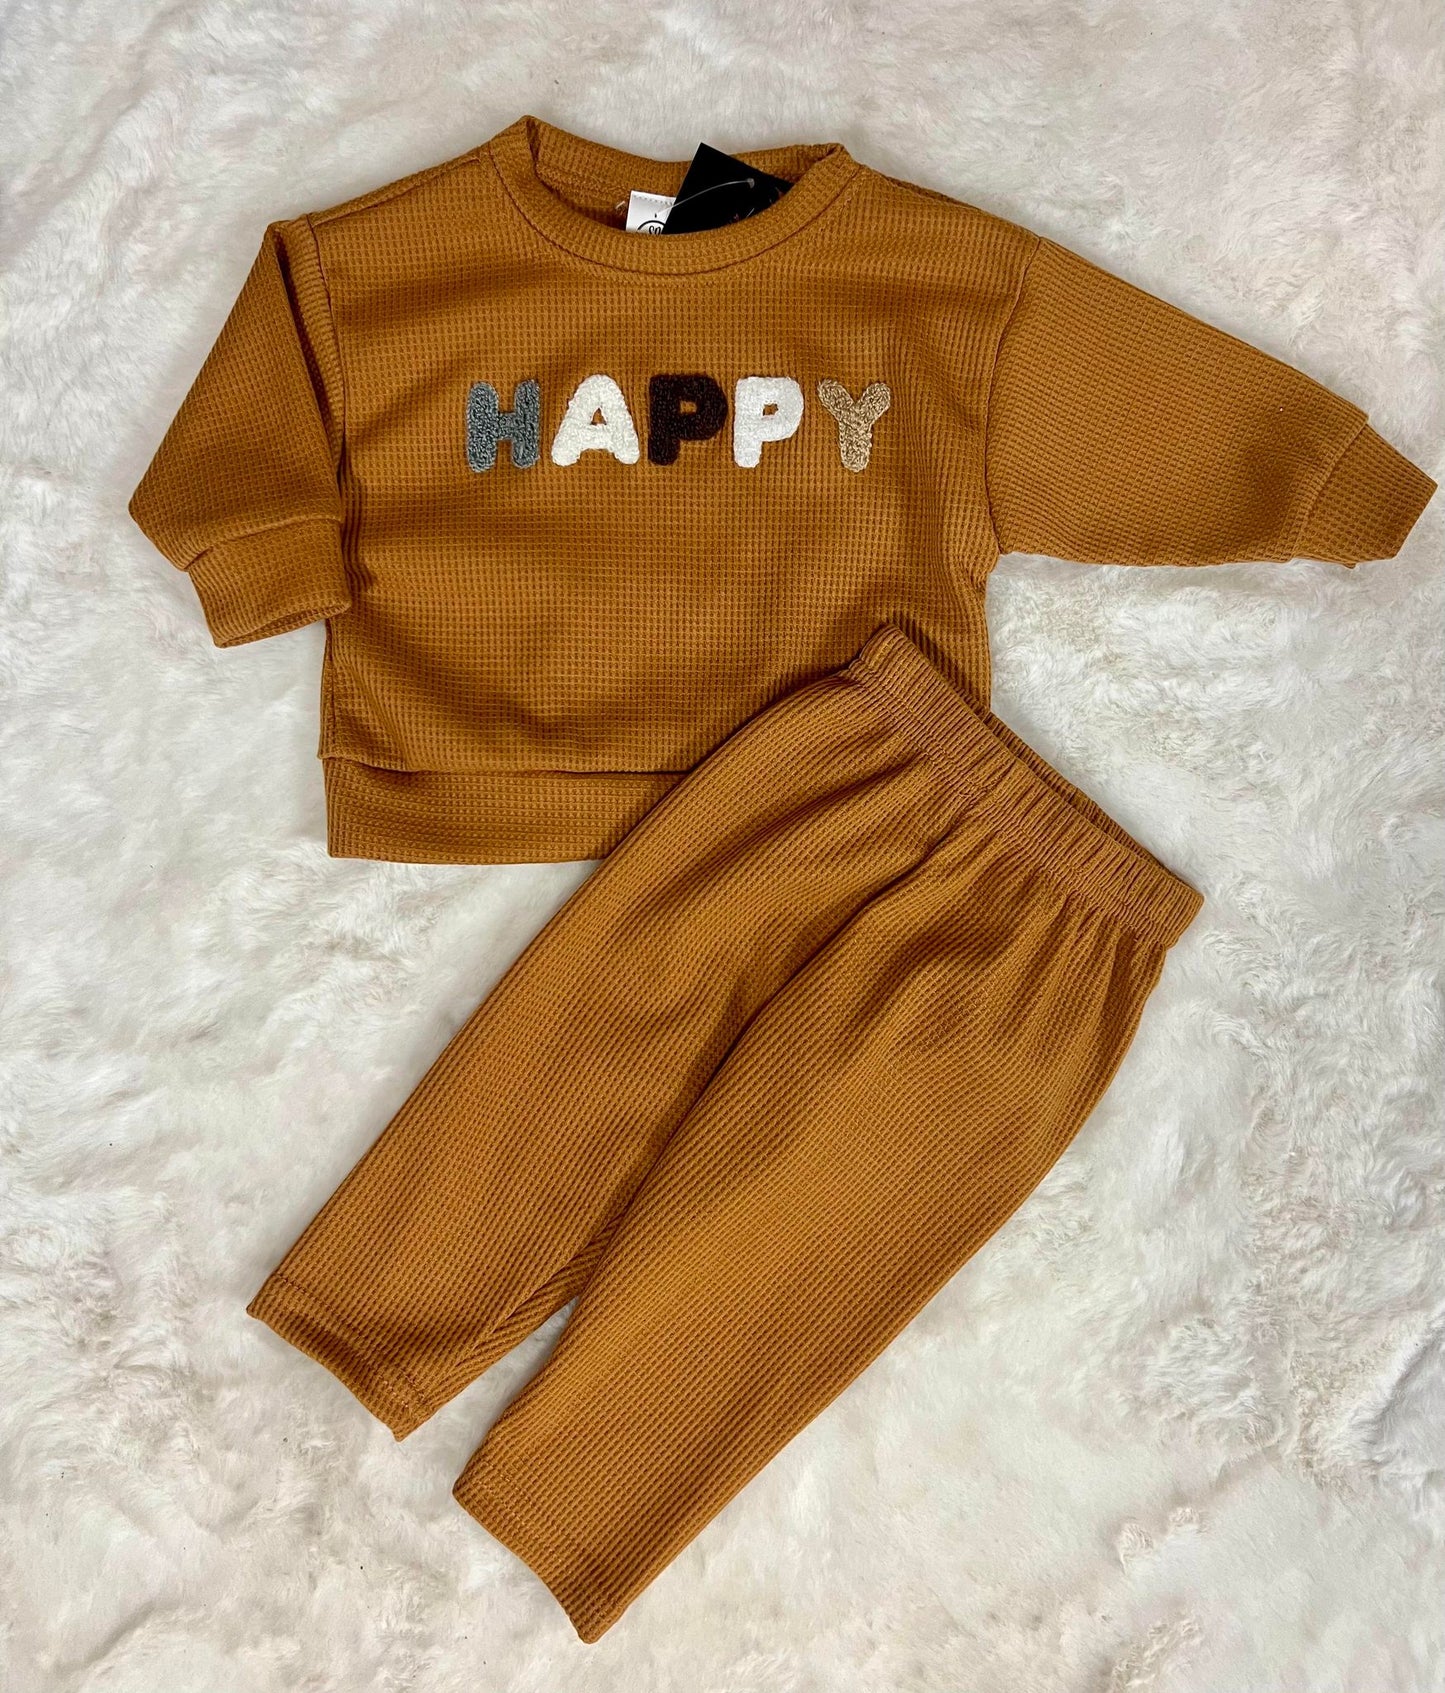 Boy's Brown "Happy" Outfit